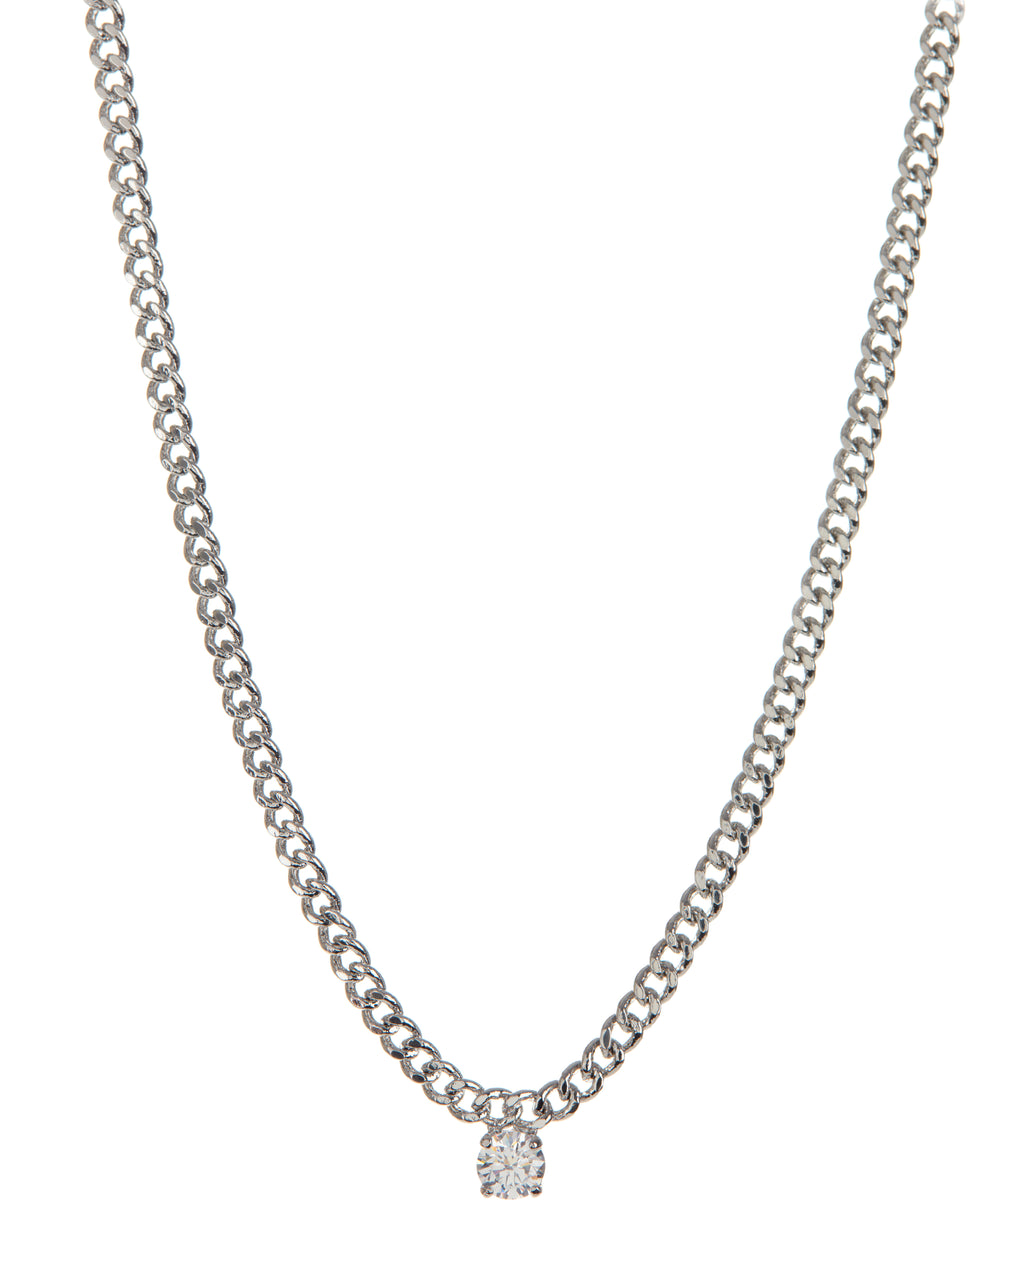 Bardot Stud Charm Necklace in Silver